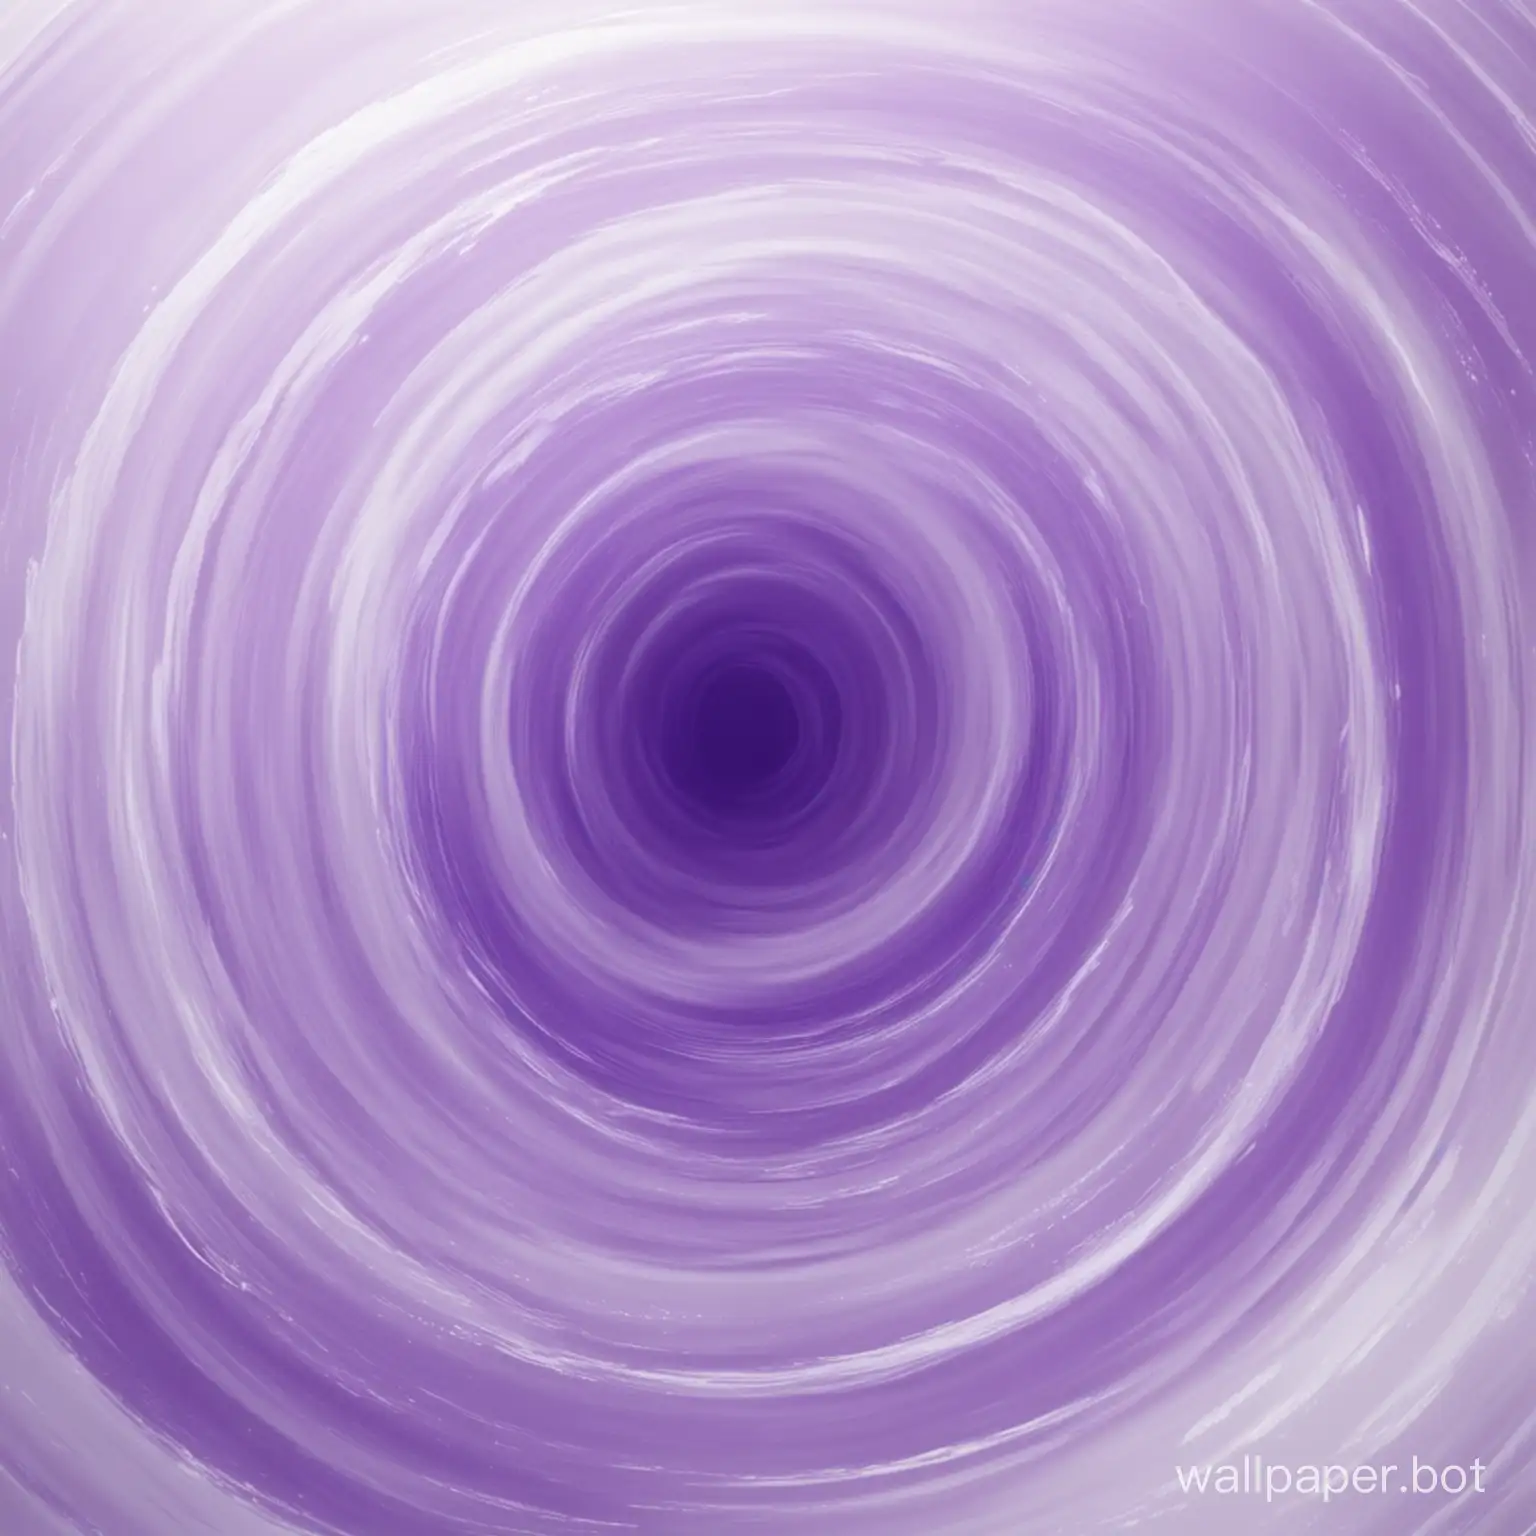 Abstract-Blurred-Forms-in-White-and-Violet-Hues